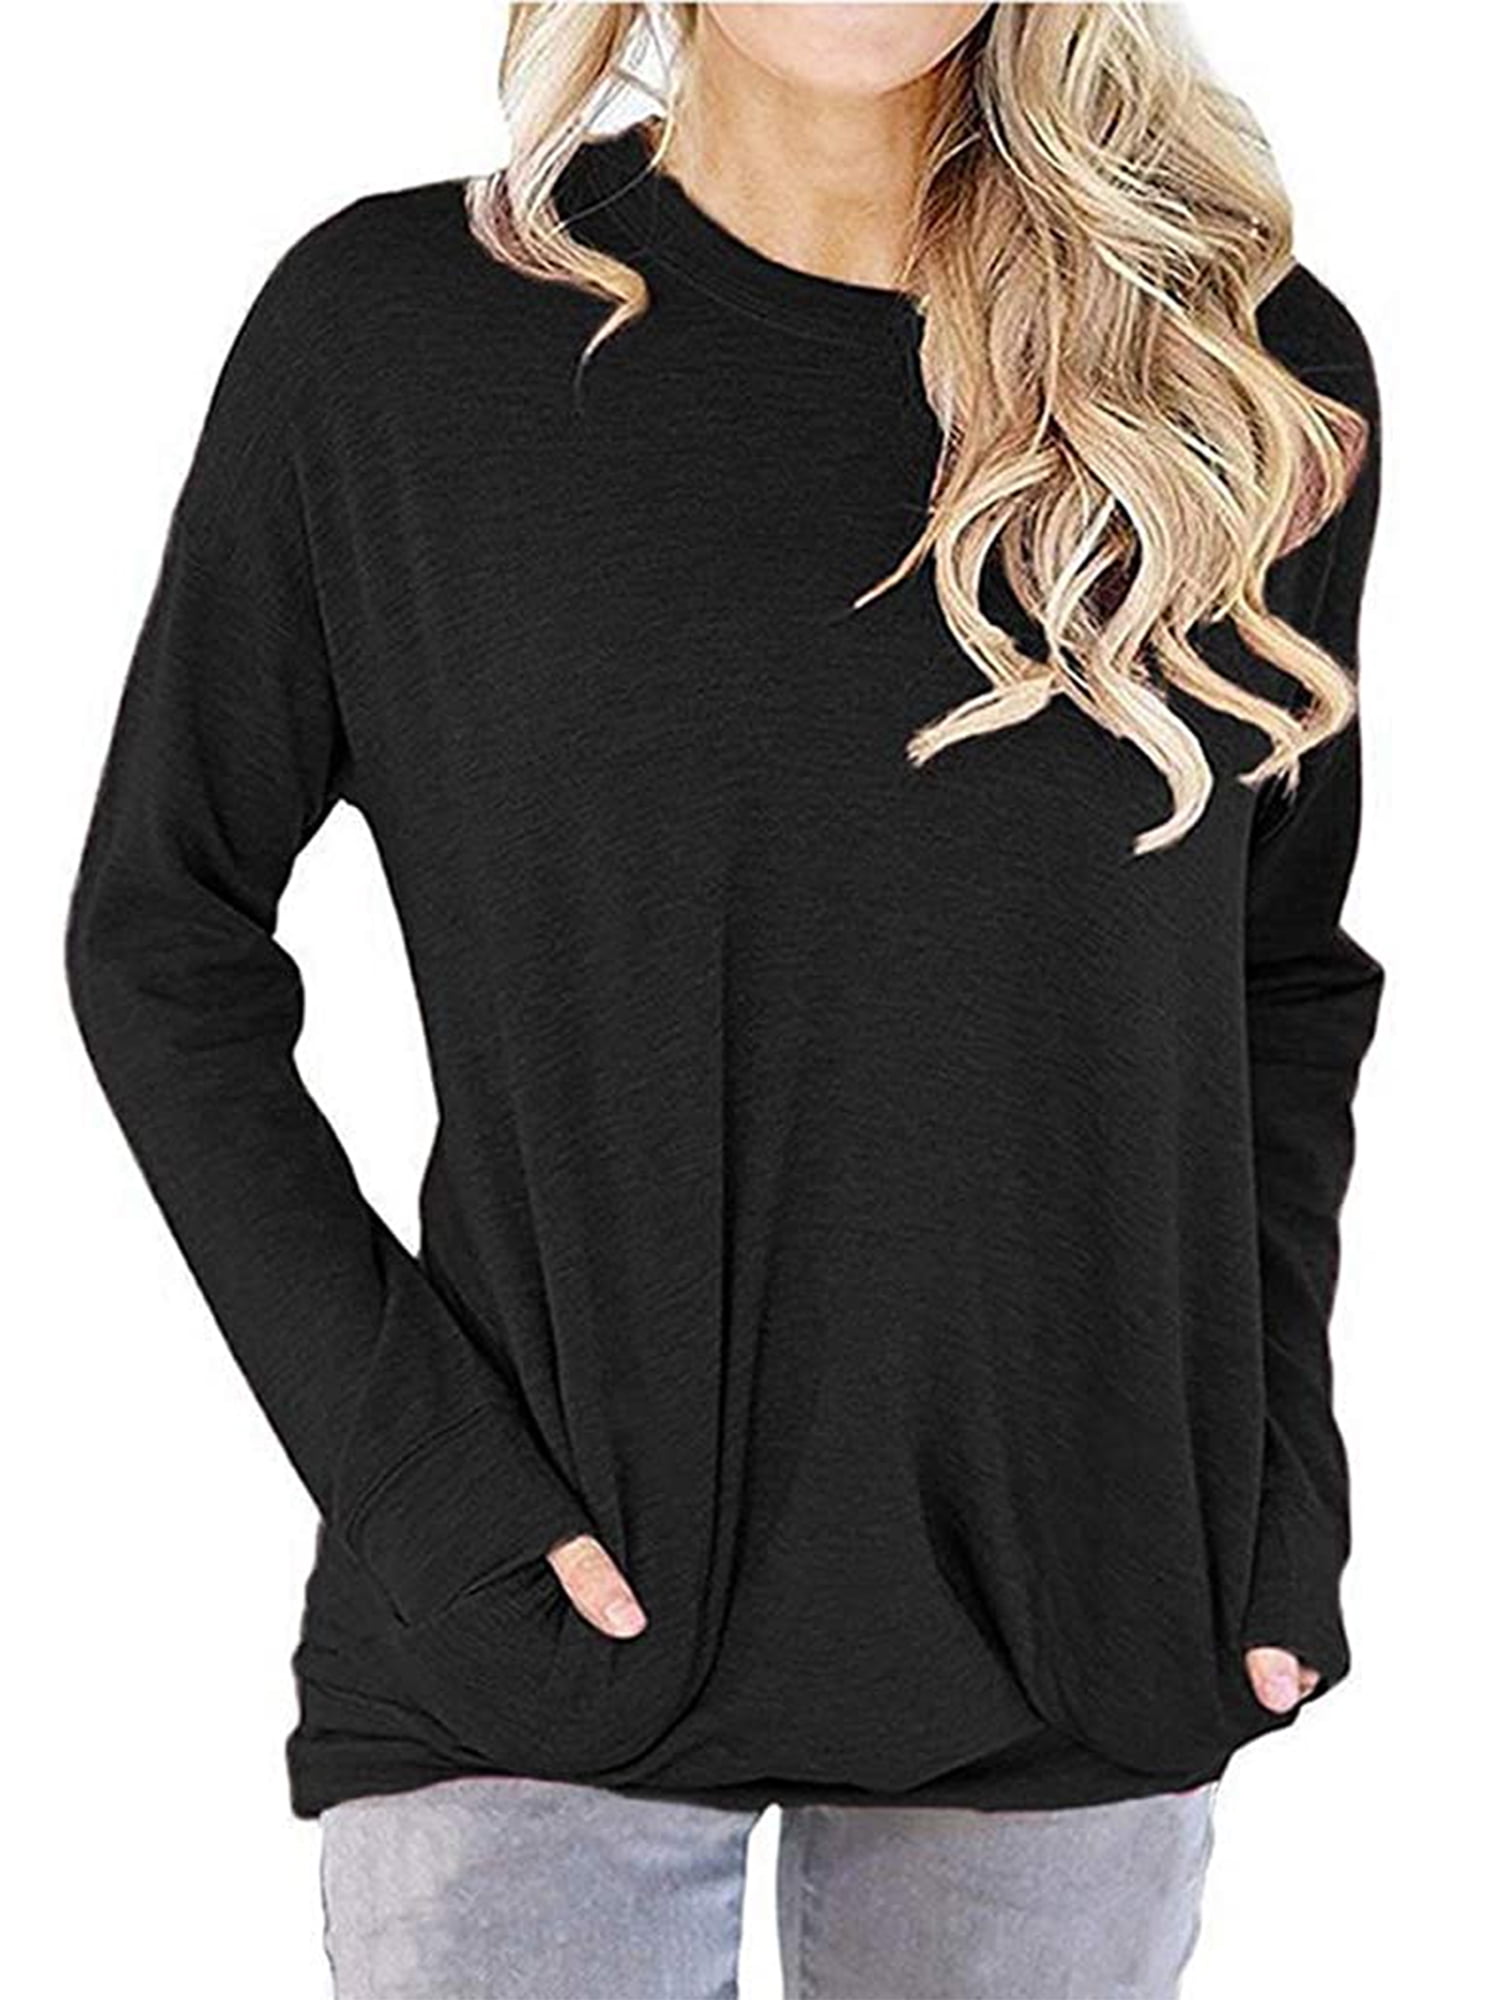 Eytino Girls Long Sleeve T Shirts Casual Solid Button Side Loose Crew Neck Tunic Tops Size 4-13 